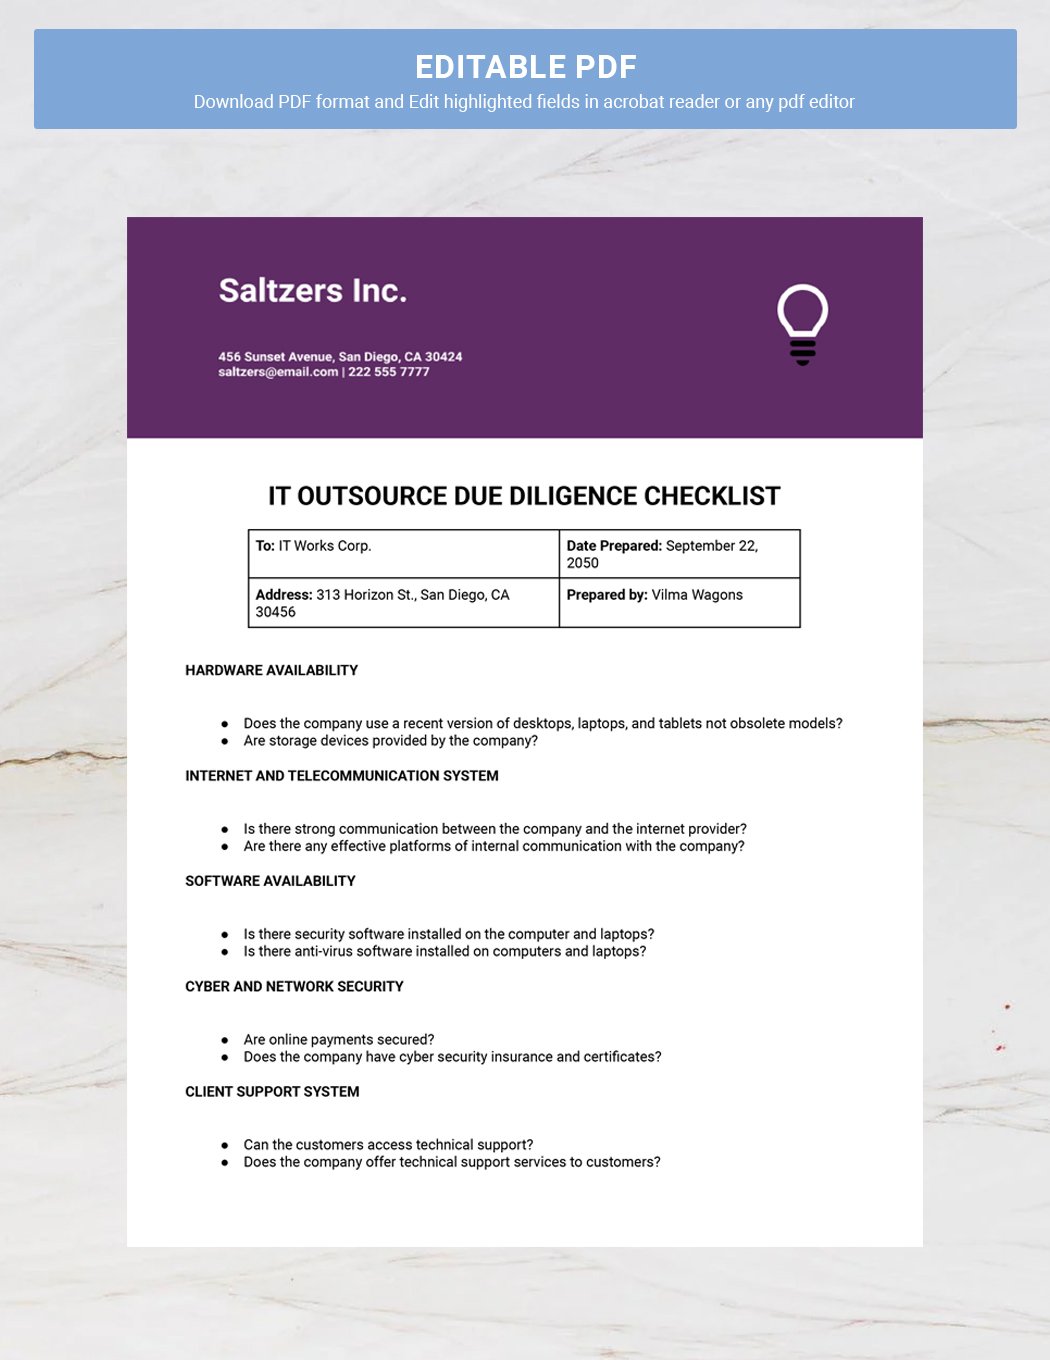 IT Outsource Due Diligence Checklist Template